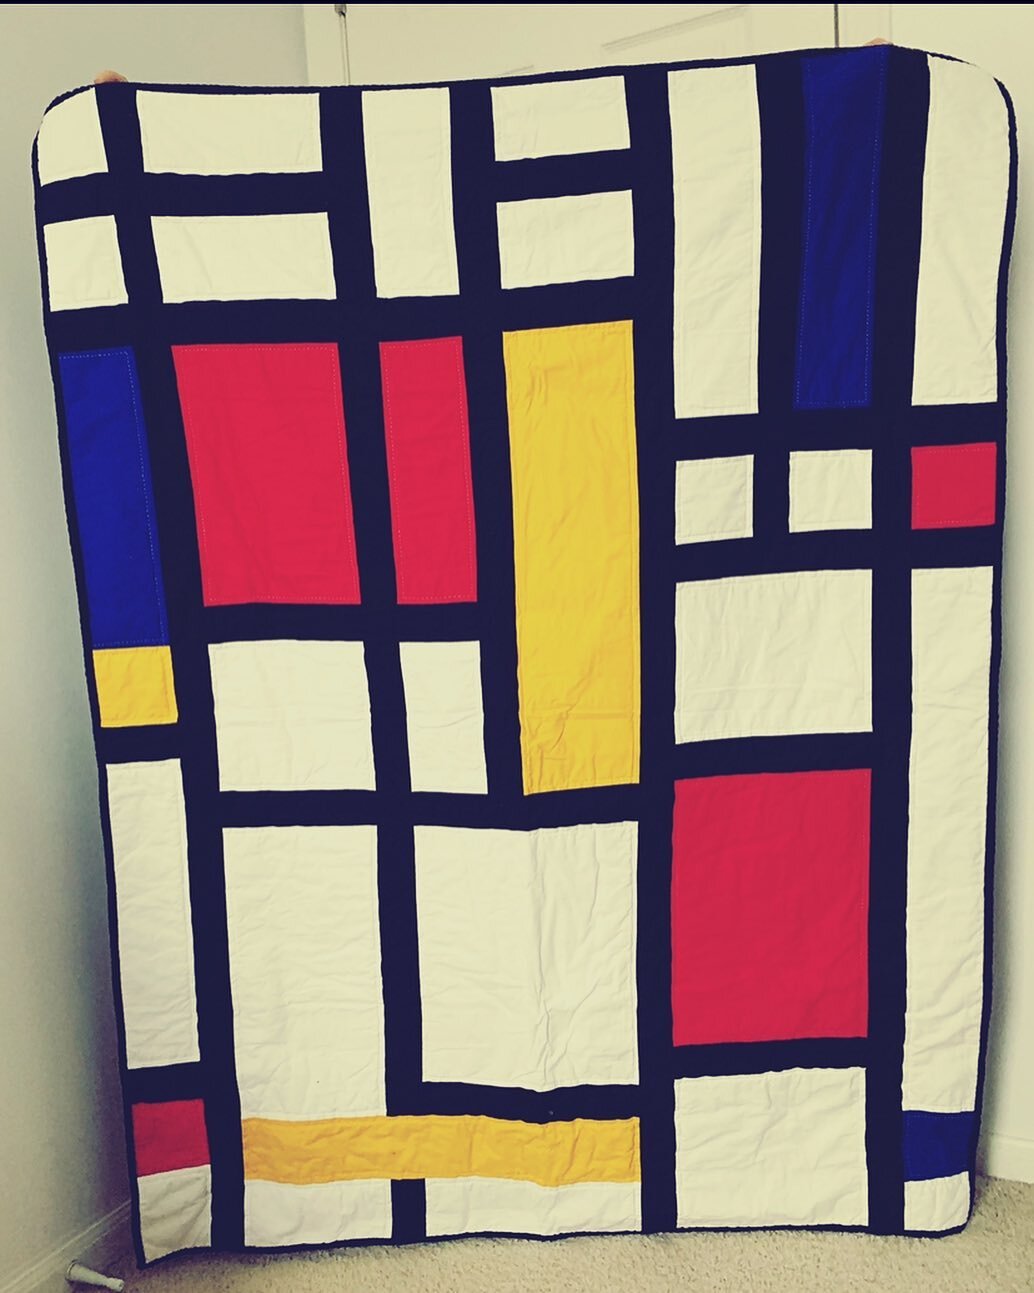 🤍💛❤️💙🖤
Now that I&rsquo;ve sent it to my friend, I can share the Mondrian inspired quilt I made her. 
#miabcreative #mondrian #mondrianquilt #handquilting #modernquilting #modernart